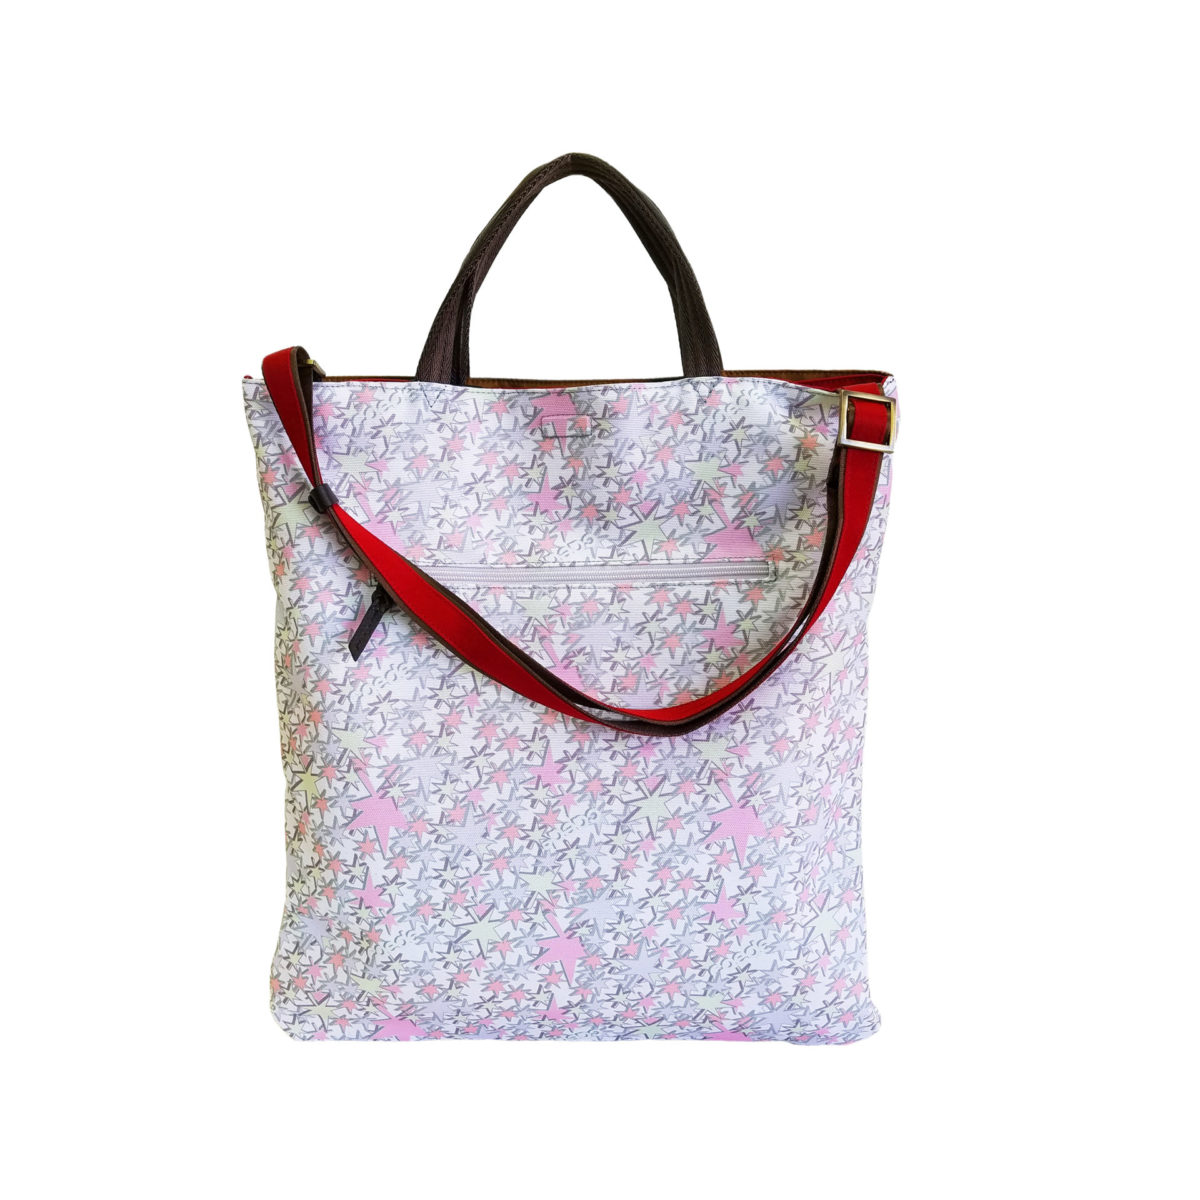 Wrinkle 3face Tote Red